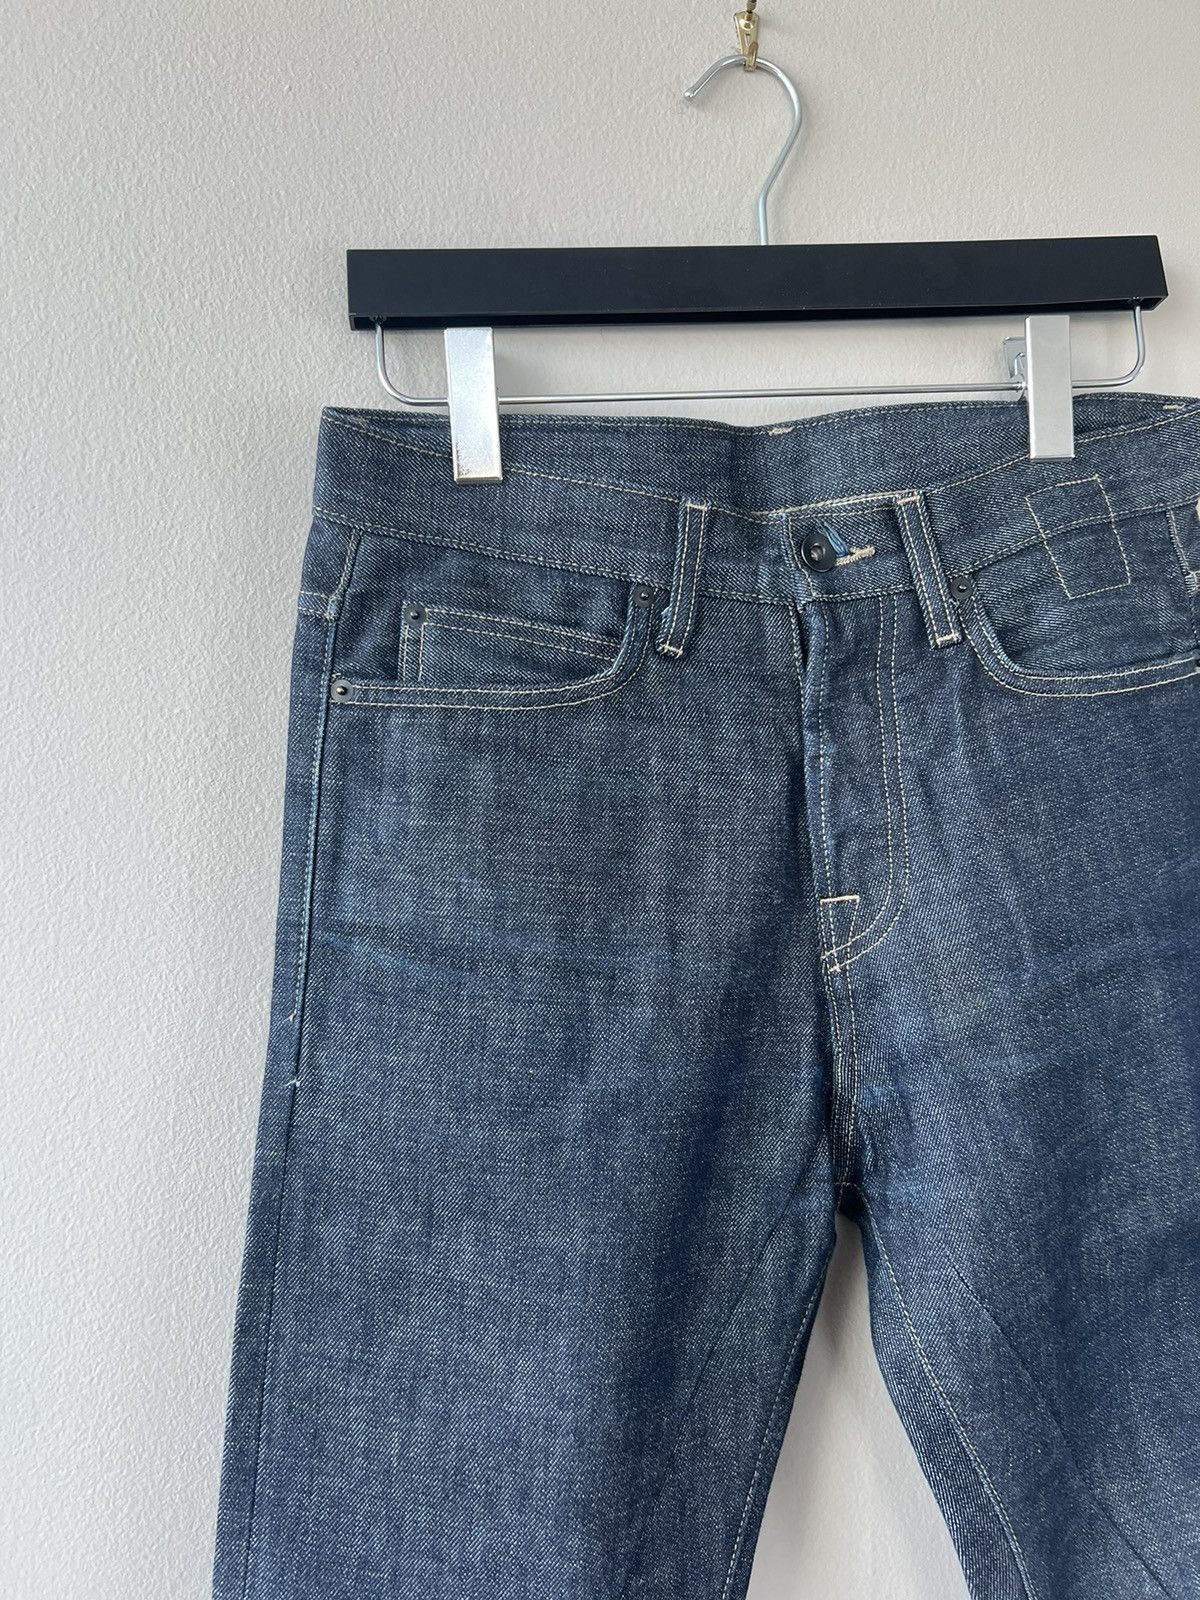 Selvedge Torrence Cut Made in Los Angeles Denim - 2